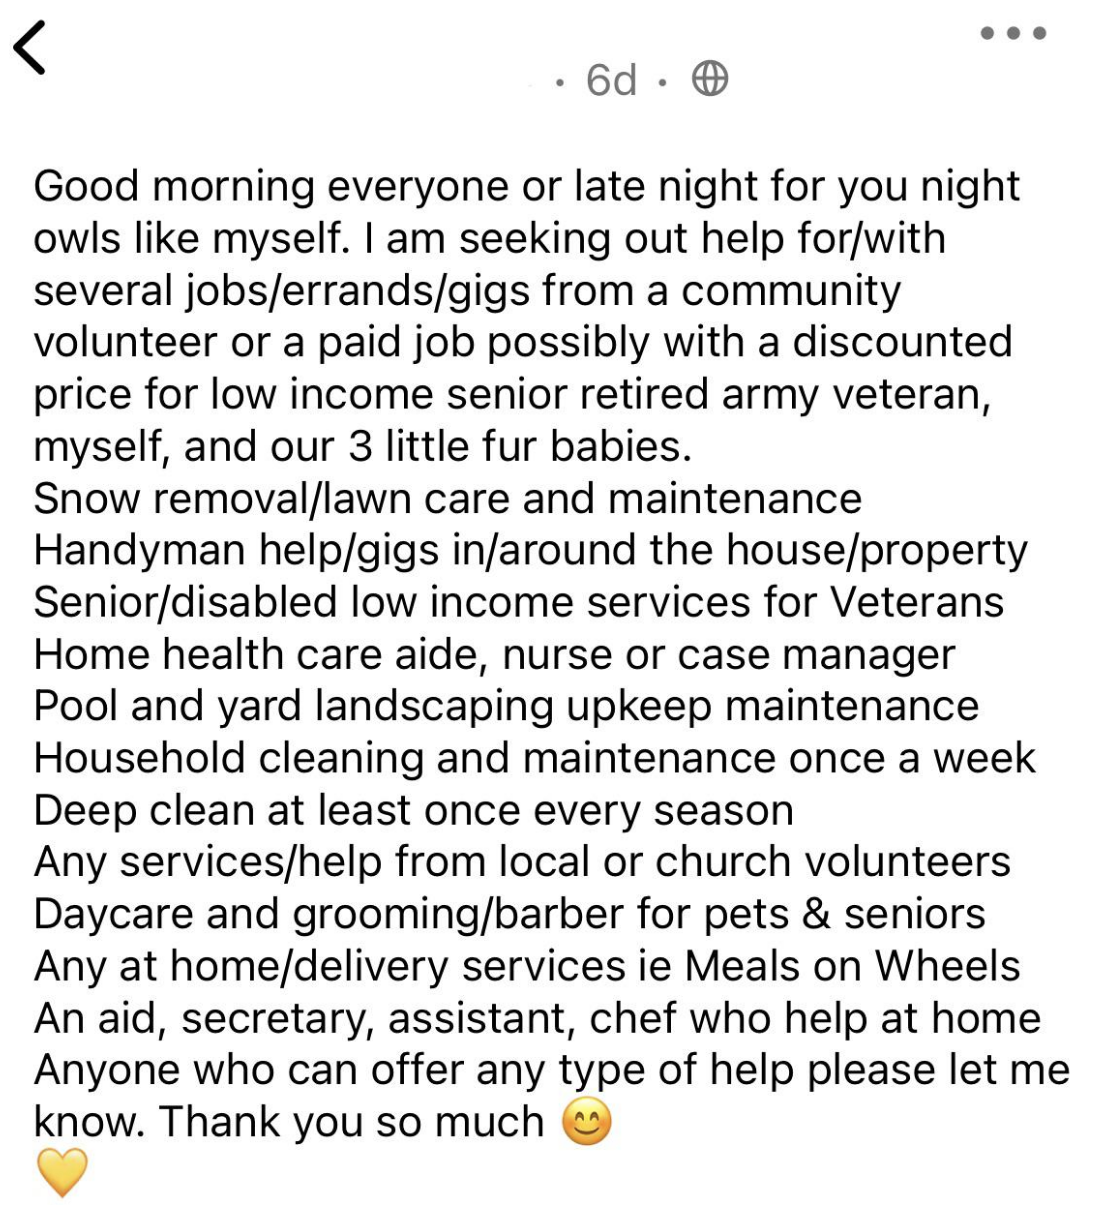 &quot;I am seeking out help for/with several jobs/errands/gigs from a community volunteer or a paid job possibly with a discounted price for low income senior retired army veteran...&quot;